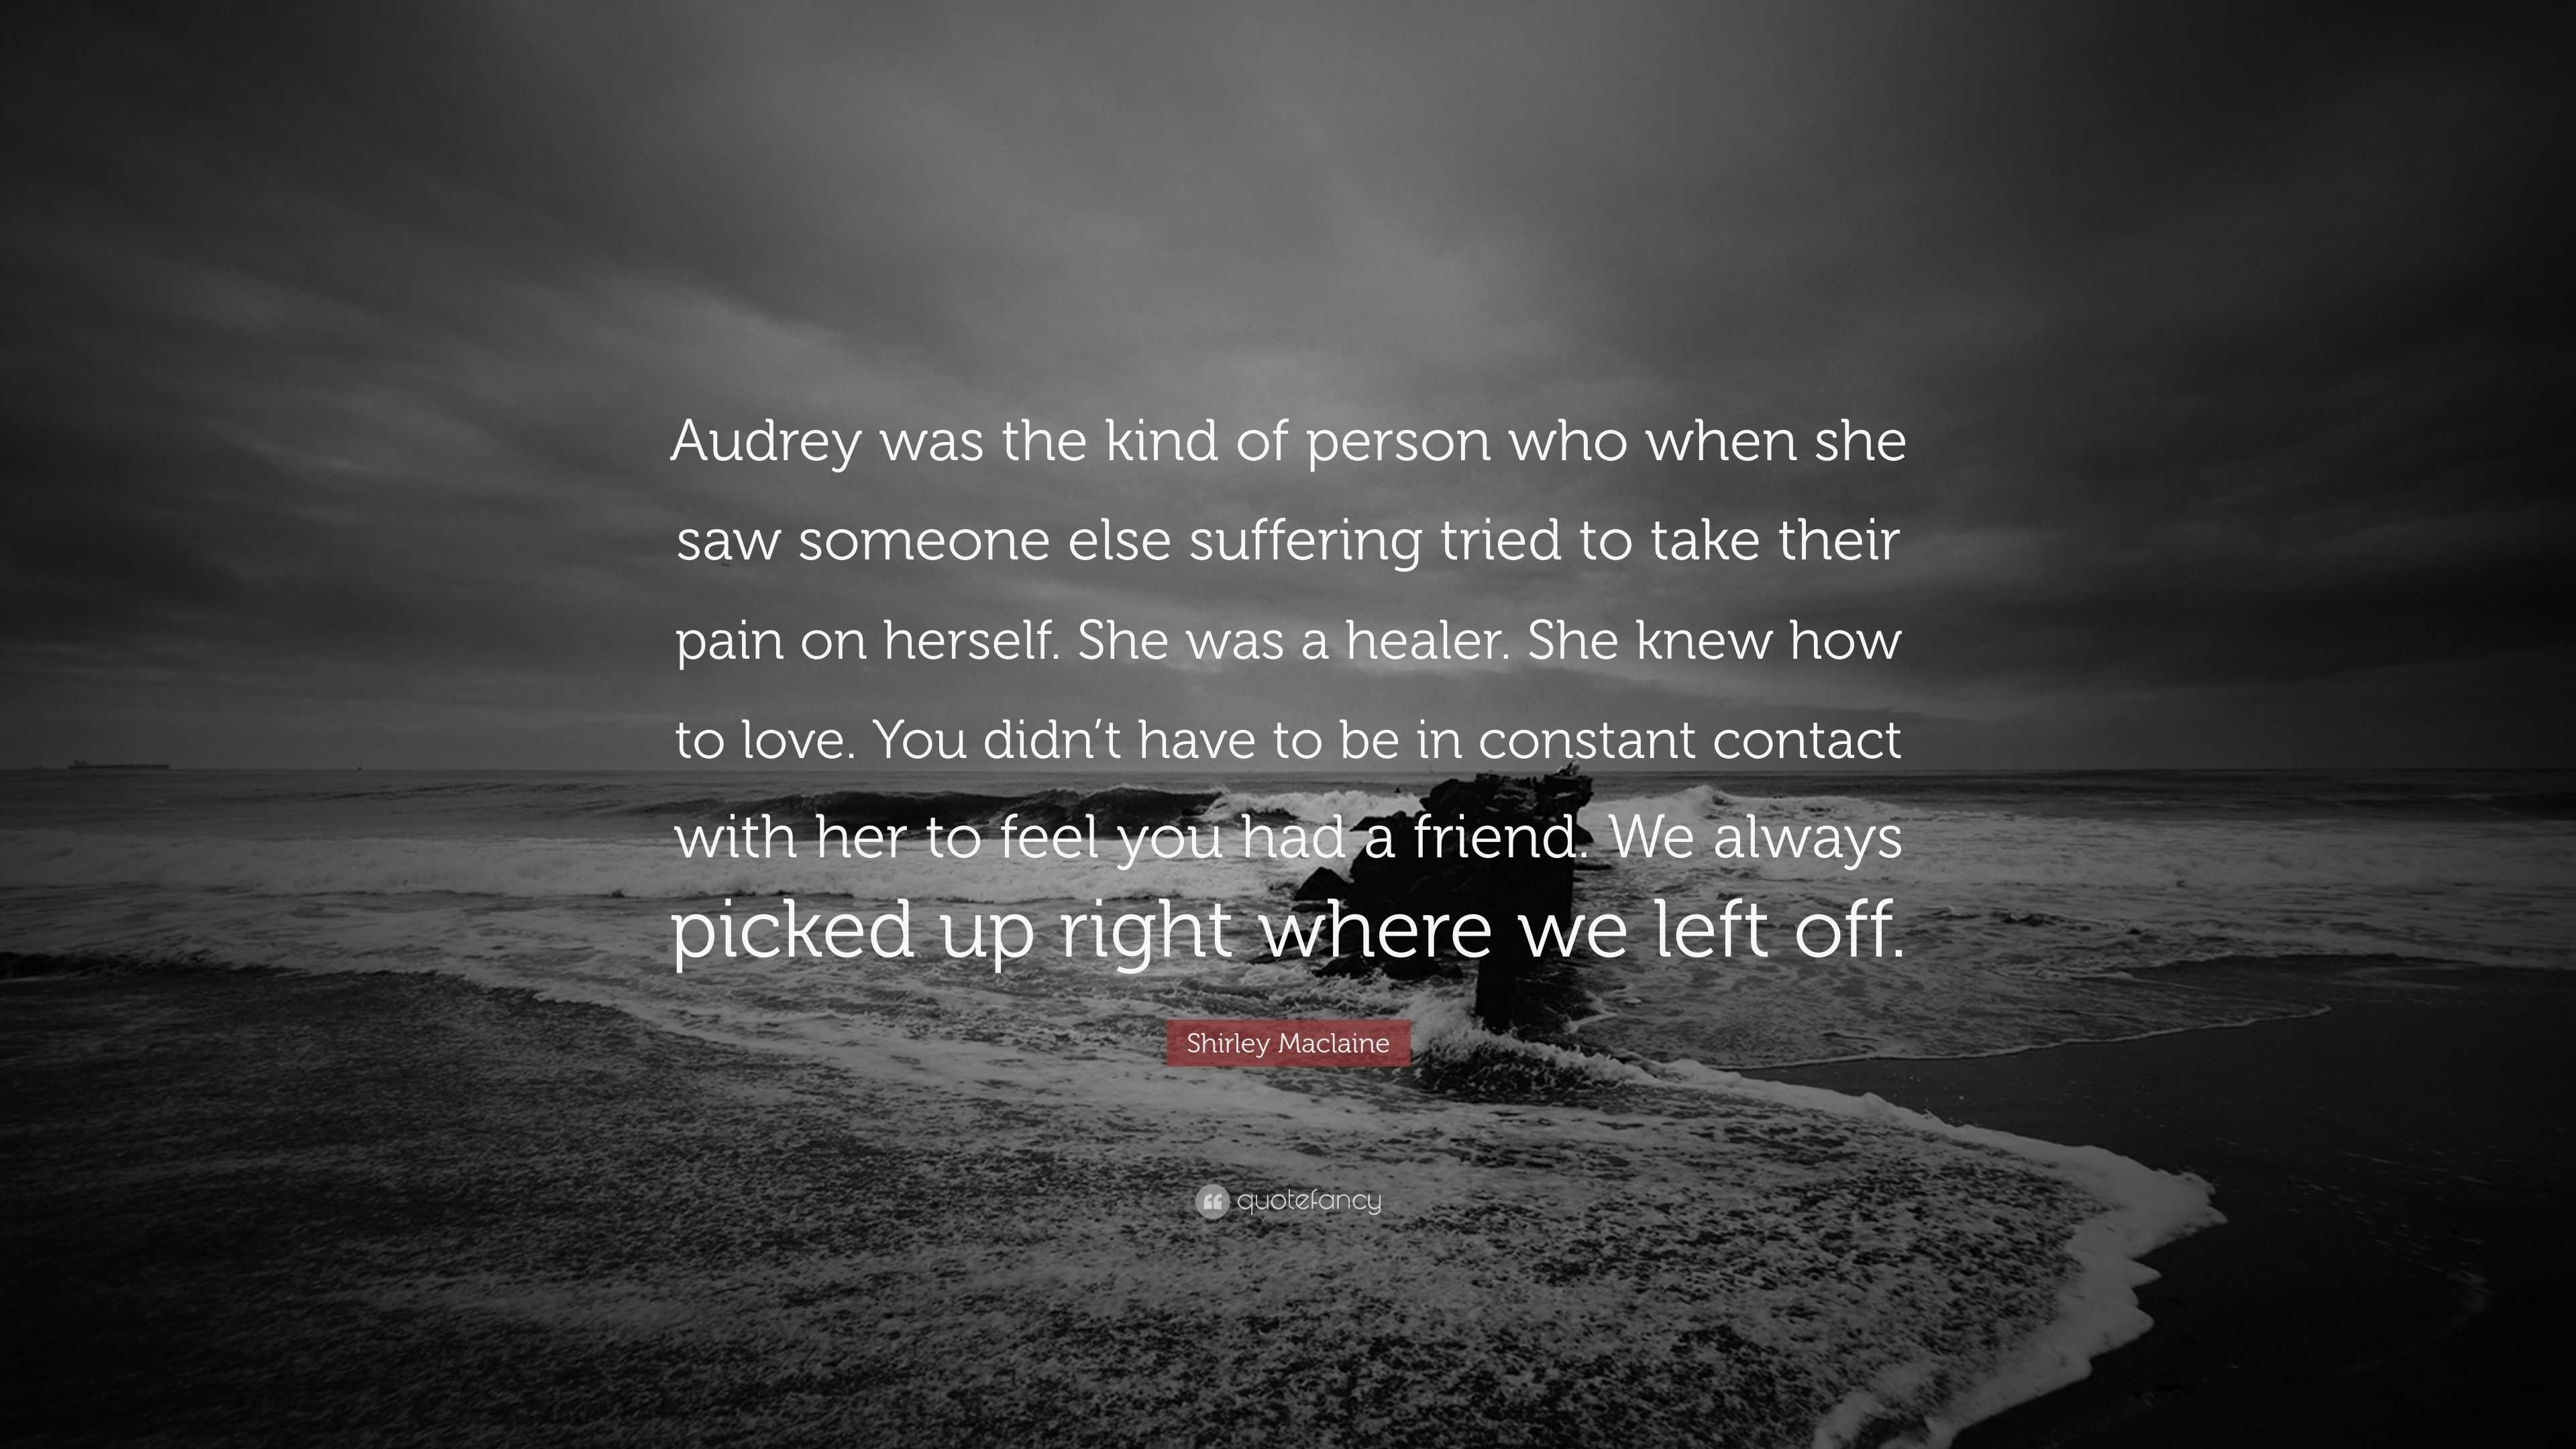 Shirley Maclaine Quote Audrey Was The Kind Of Person Who When She Saw Someone Else Suffering Tried To Take Their Pain On Herself She Was A Hea 7 Wallpapers Quotefancy